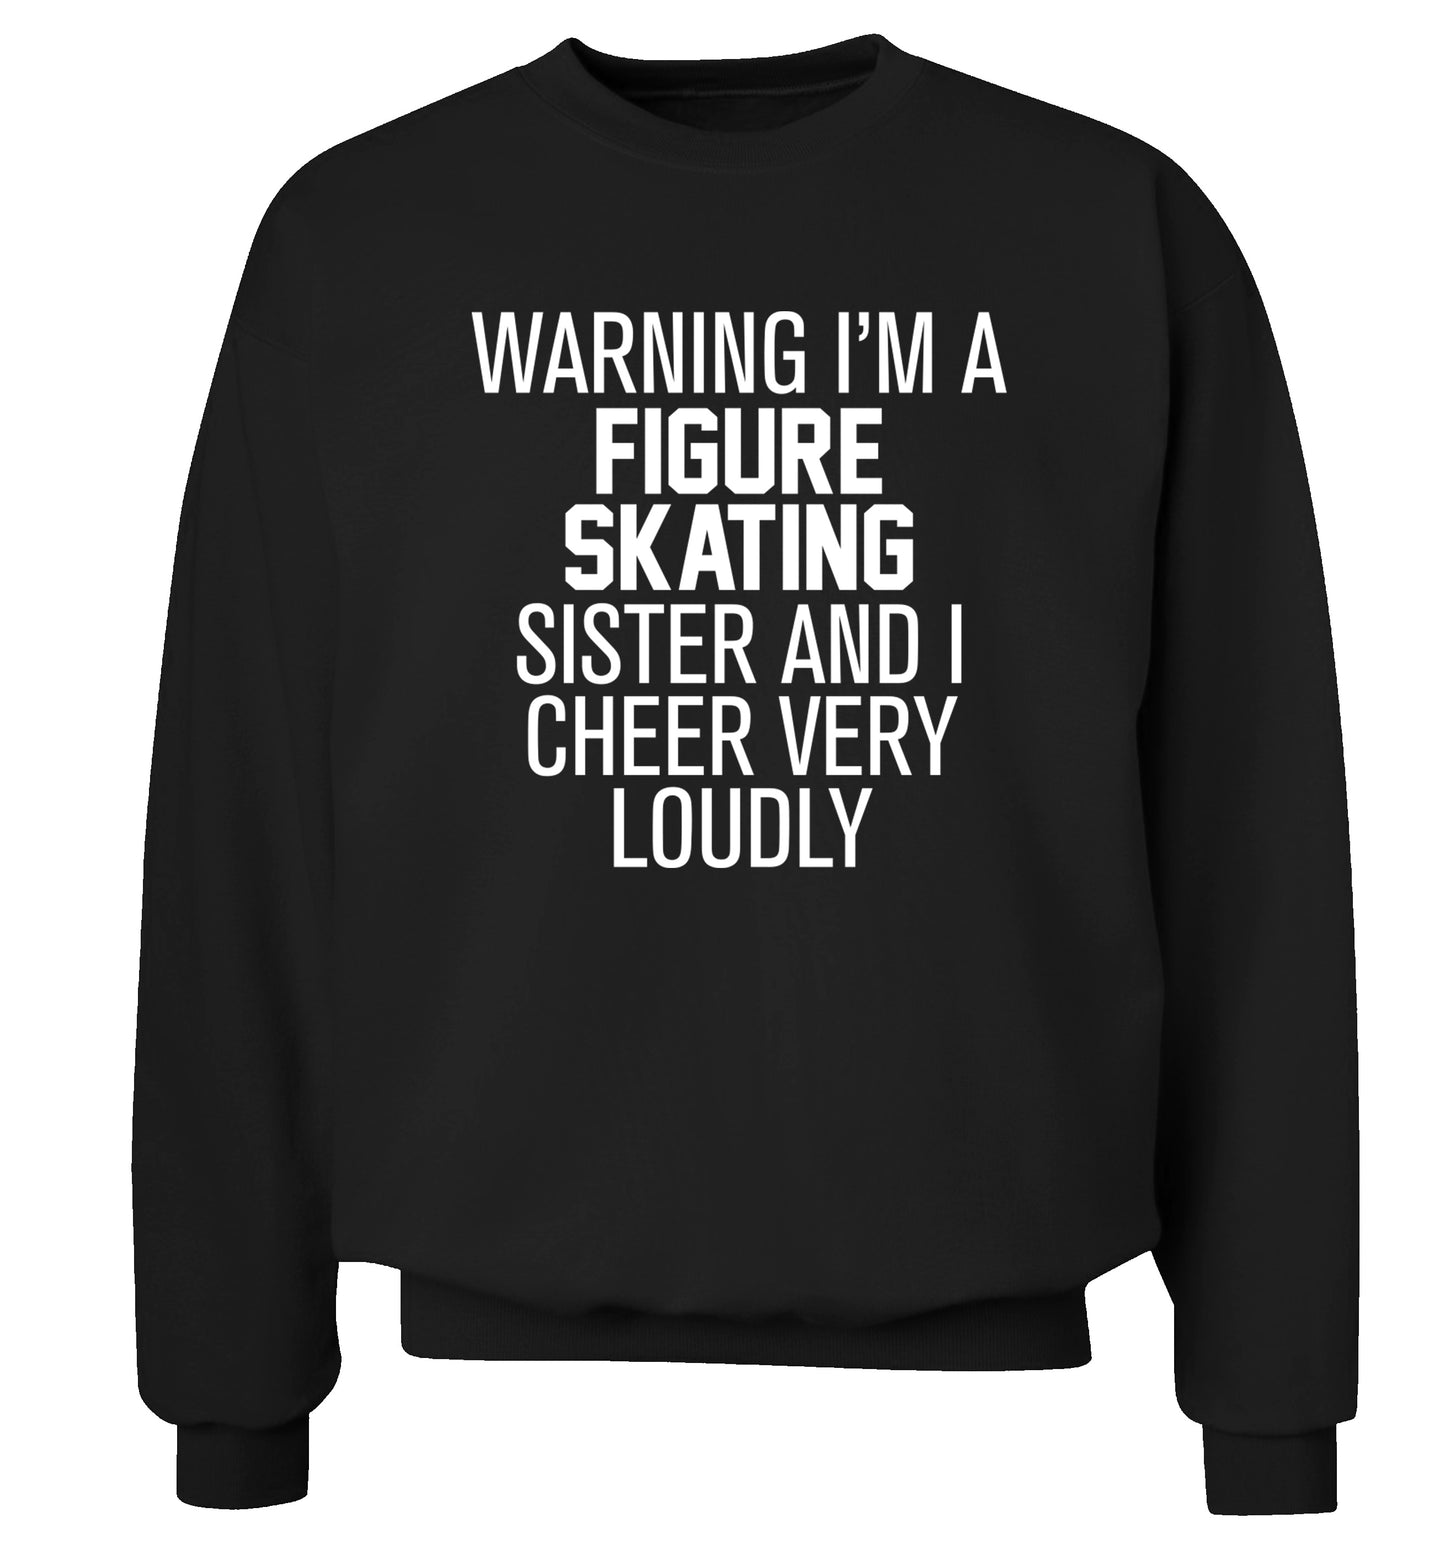 Warning I'm a figure skating sister and I cheer very loudly Adult's unisexblack Sweater 2XL